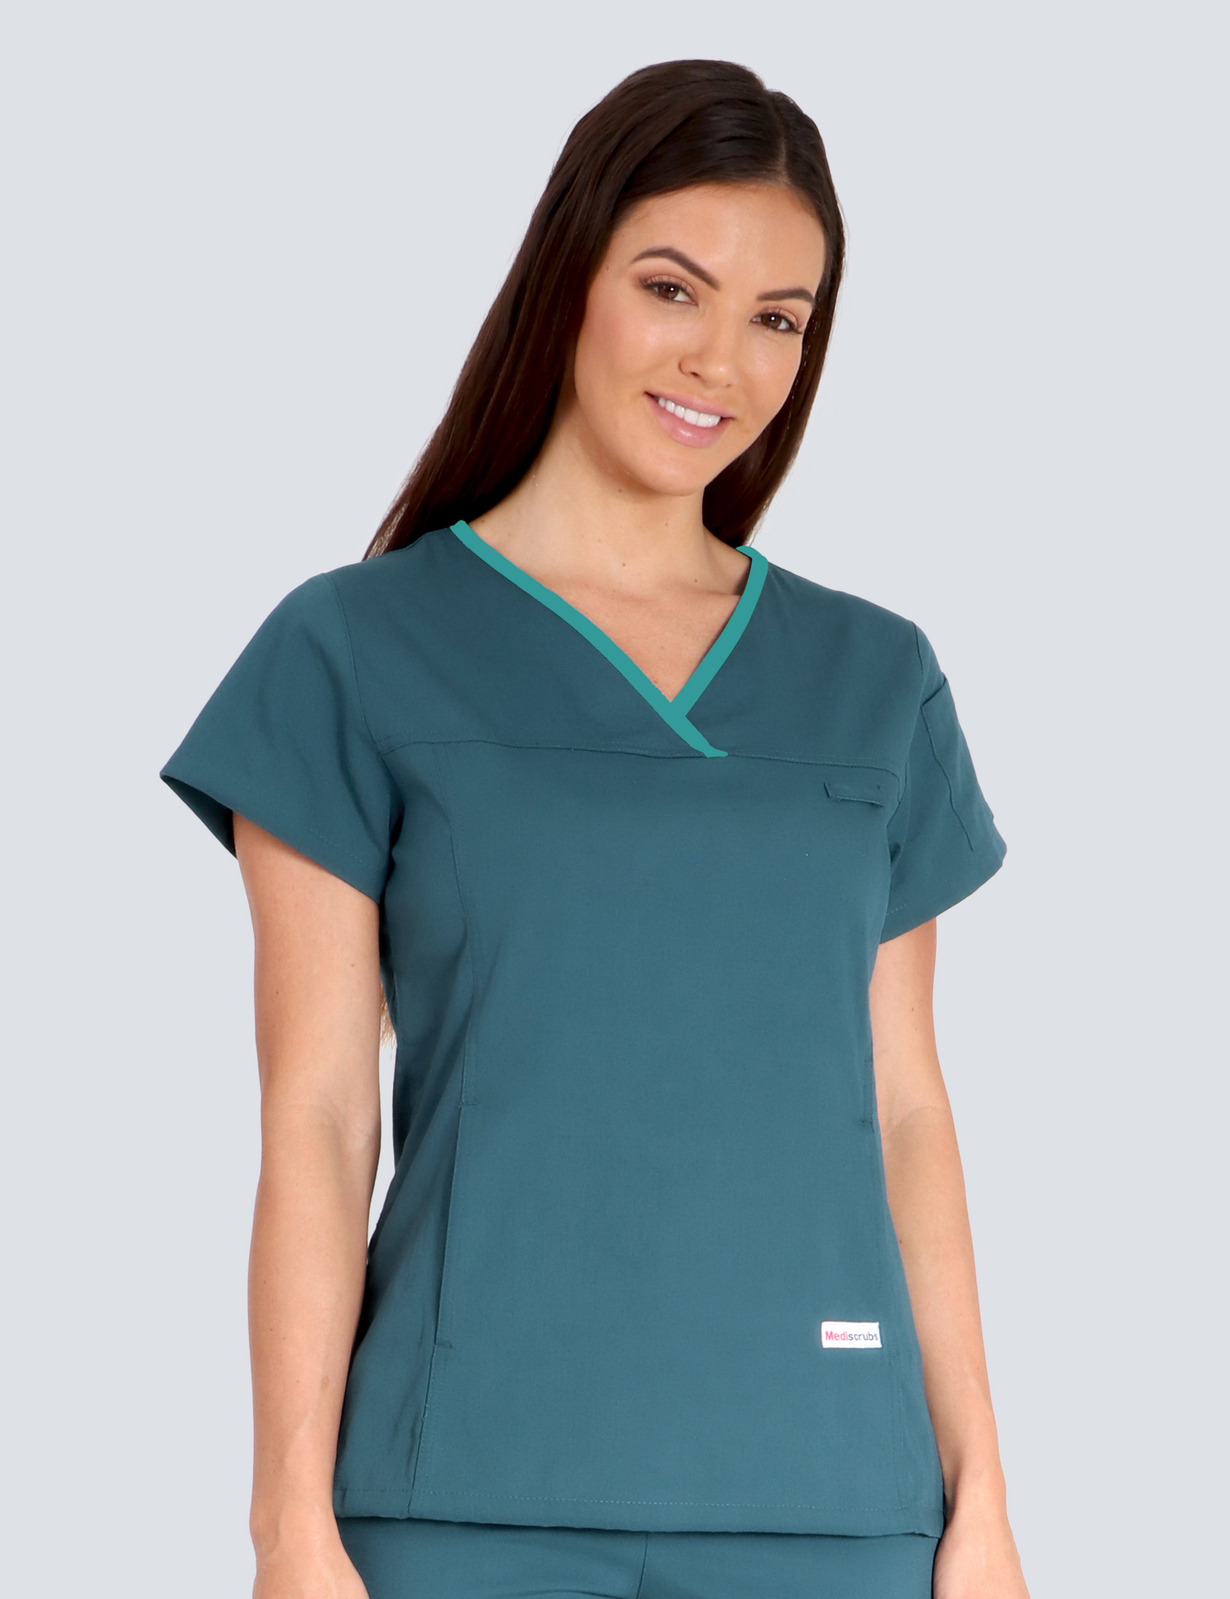 Northside Vets - Vet (Women's Fit Solid Scrub Top in Caribbean with Teal Trim incl Logos)